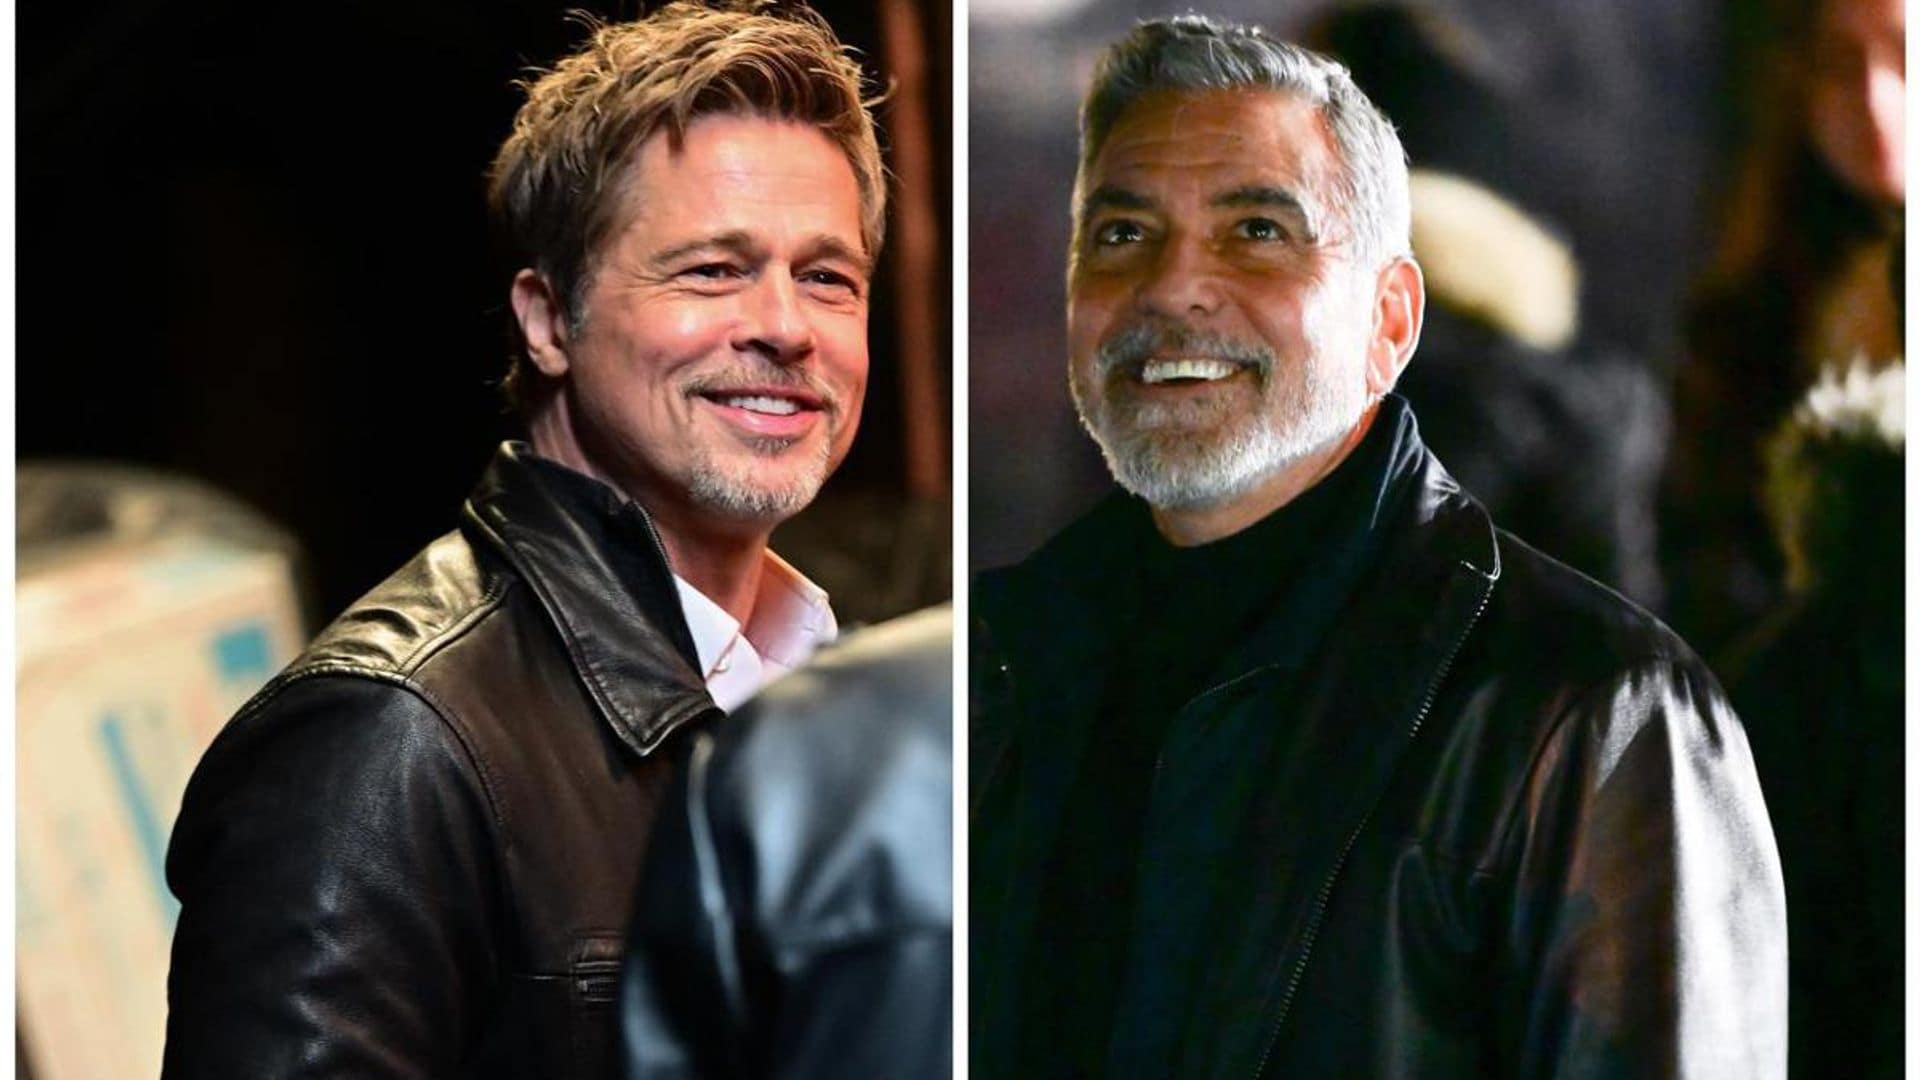 Brad Pitt and George Clooney spotted in all-black outfits on the set of ‘Wolves’ in NYC